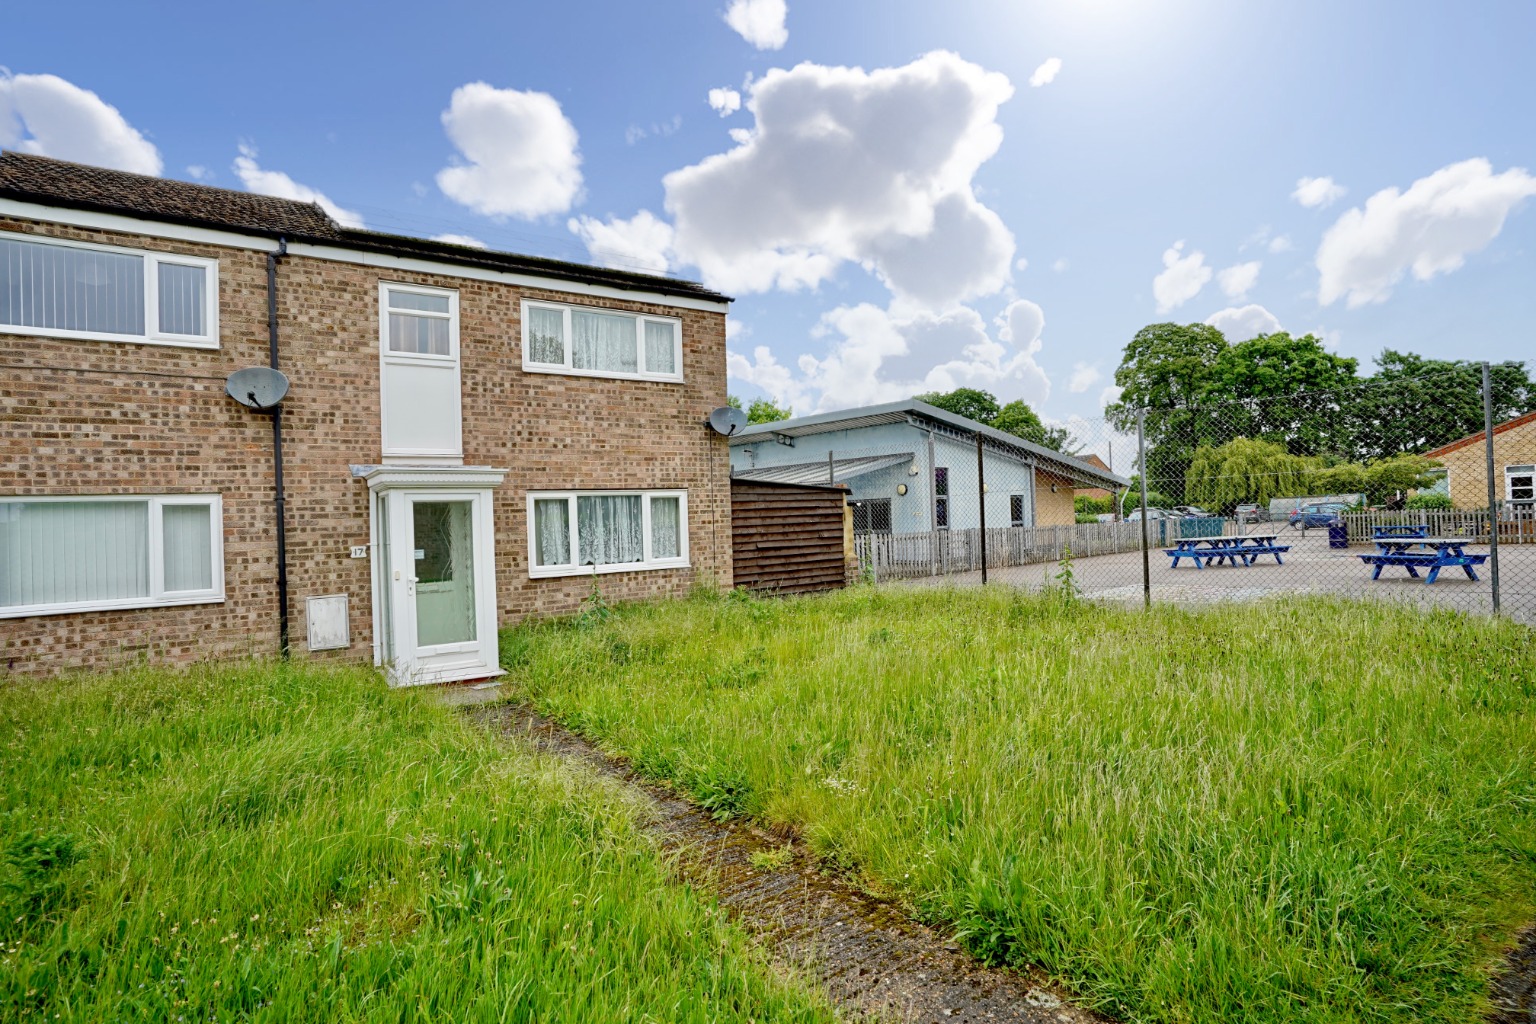 3 bed  for sale in Pepys Road, St. Neots, PE19